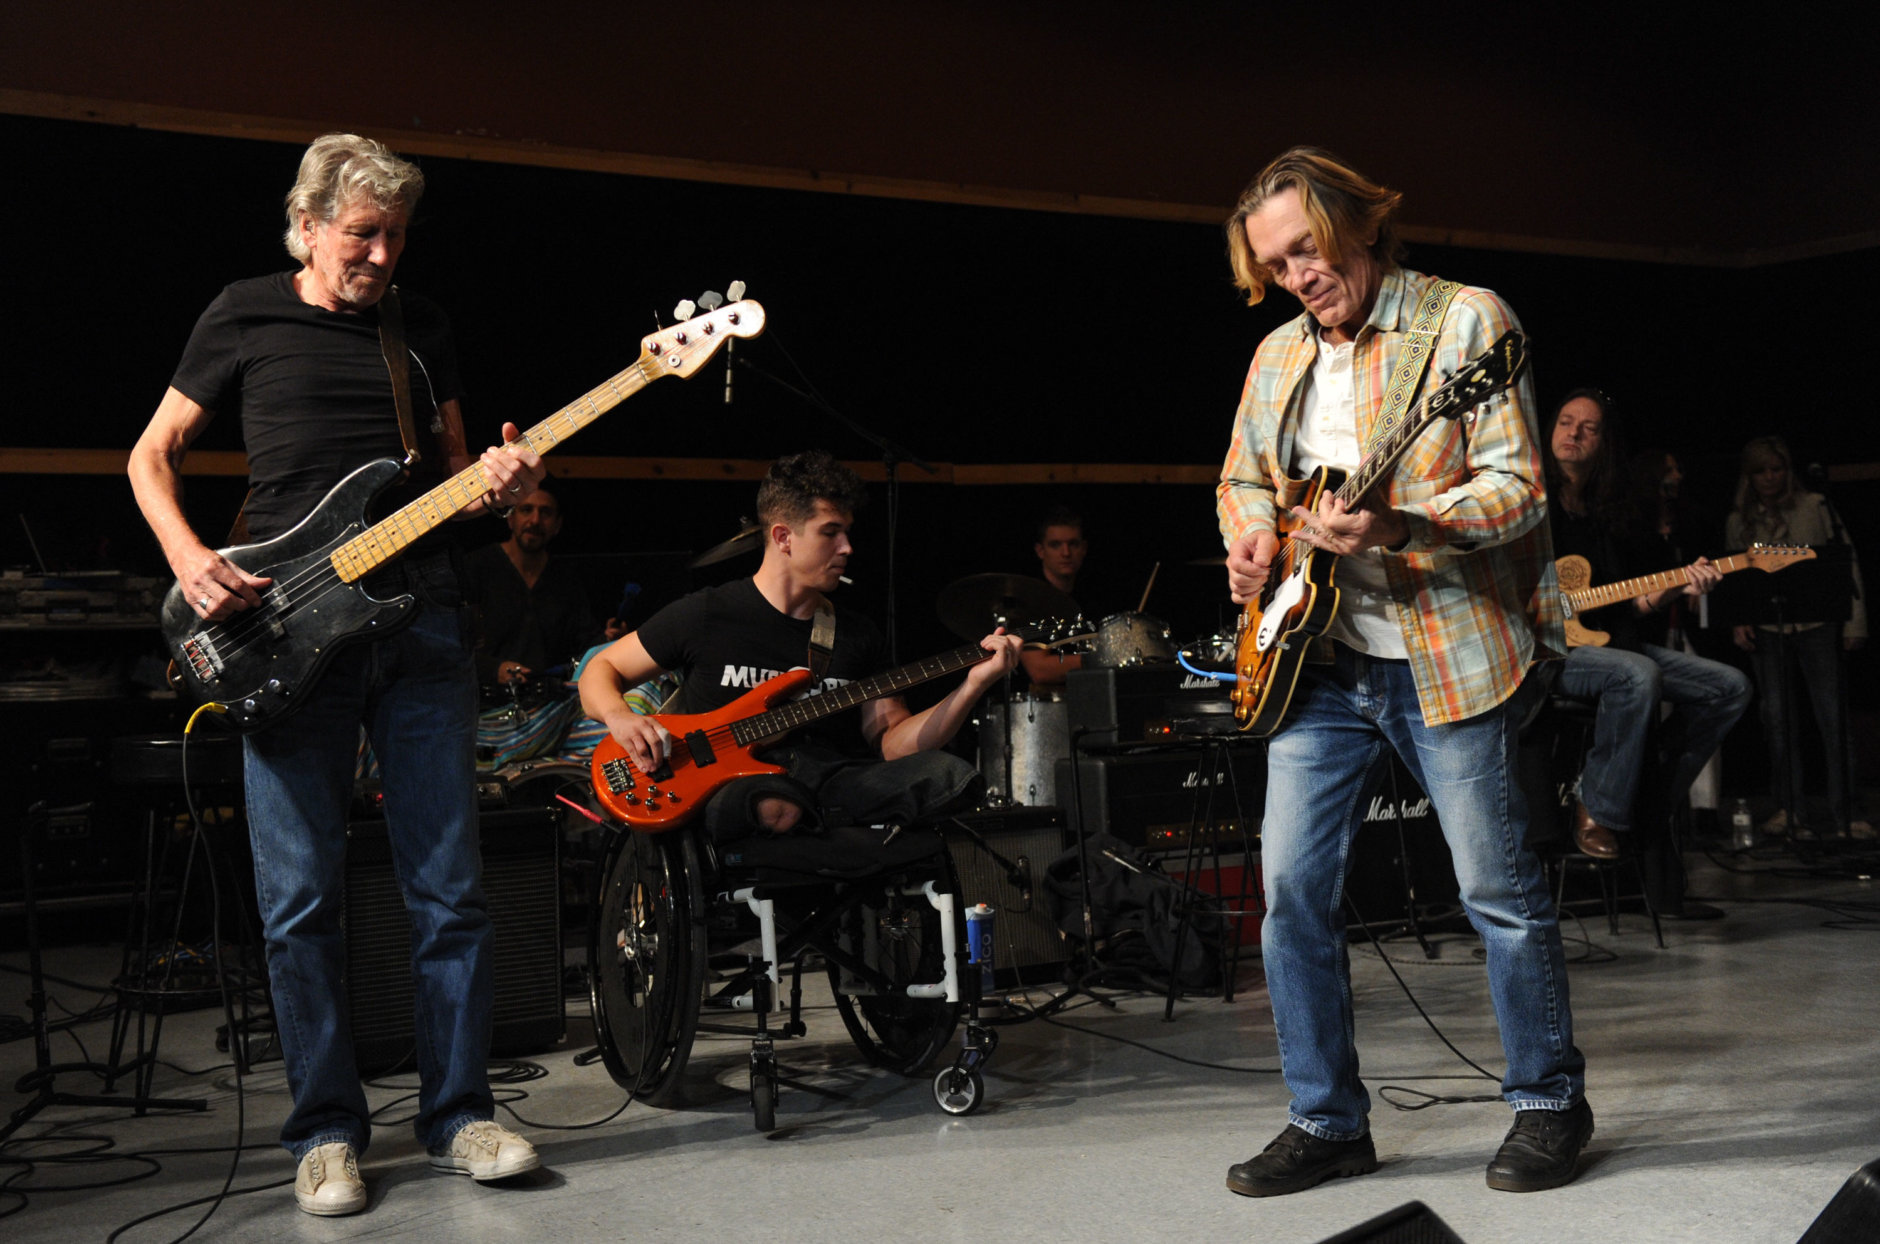 Musician Roger Waters, left, and his band member guitarist G.E. Smith, right, hold rehearsals with members of the Wounded Warriors Project, including Marine Corporal Marcus Dandre, for the "Stand Up For Heroes" benefit concert presented by the New York Comedy Festival &amp; the Bob Woodruff Foundation at S.I.R. Studios on Monday, Nov. 4, 2013, in New York. (Photo by Evan Agostini/Invision/AP)